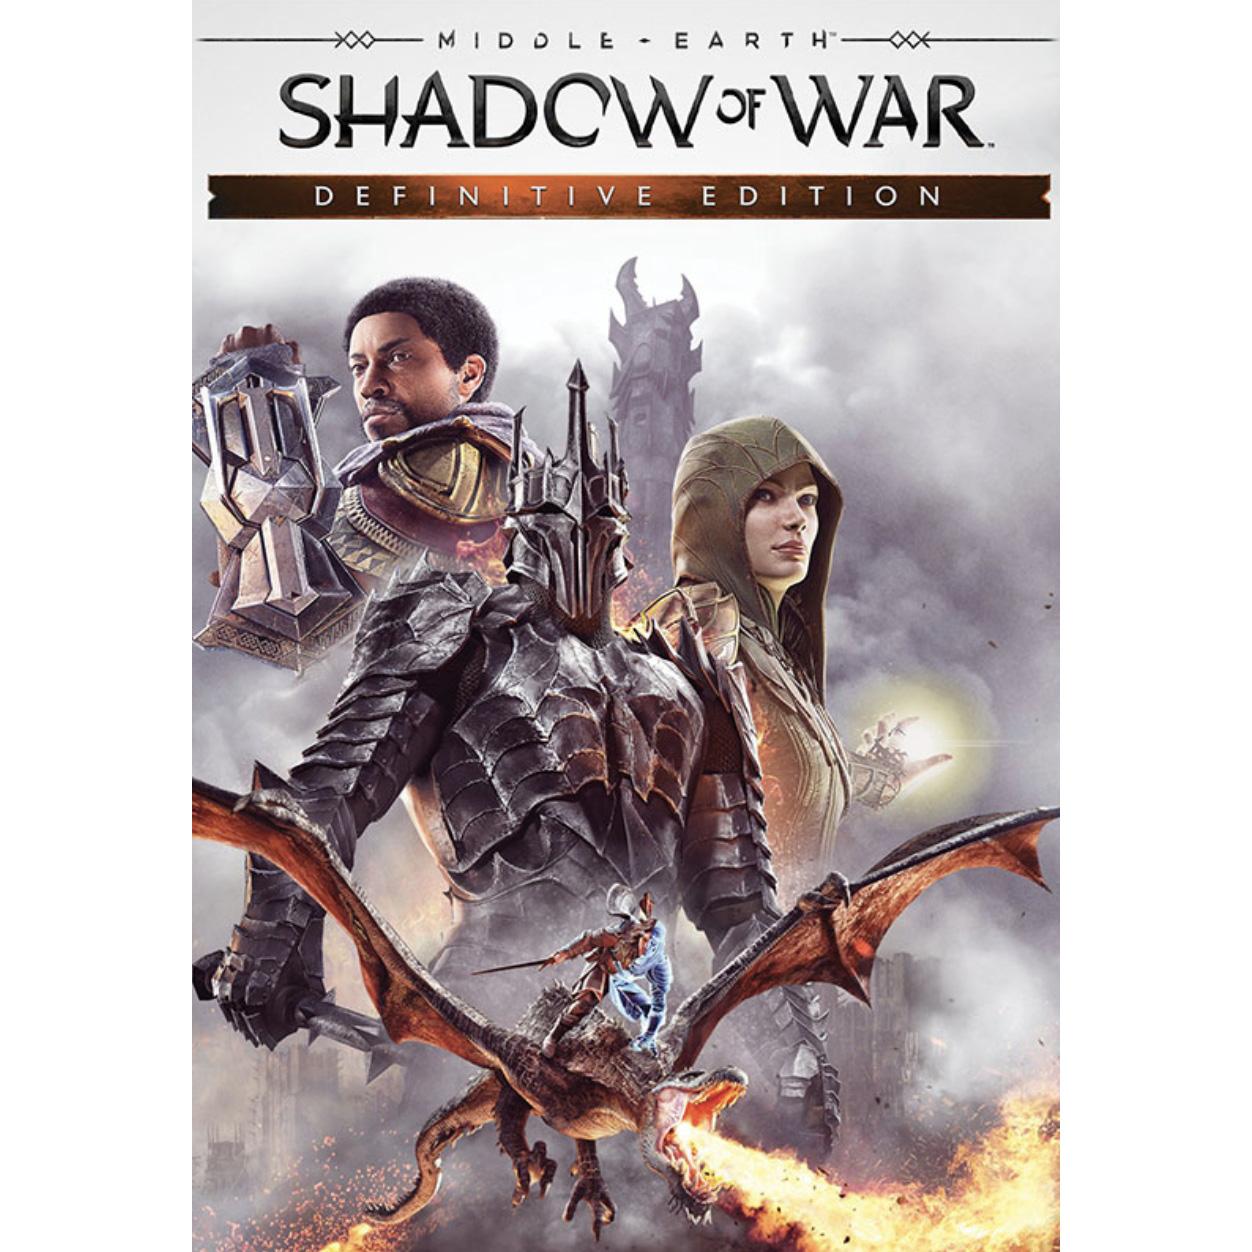 Middle-Earth Shadow of Mordor Definitive Edition PC Download for $5.29